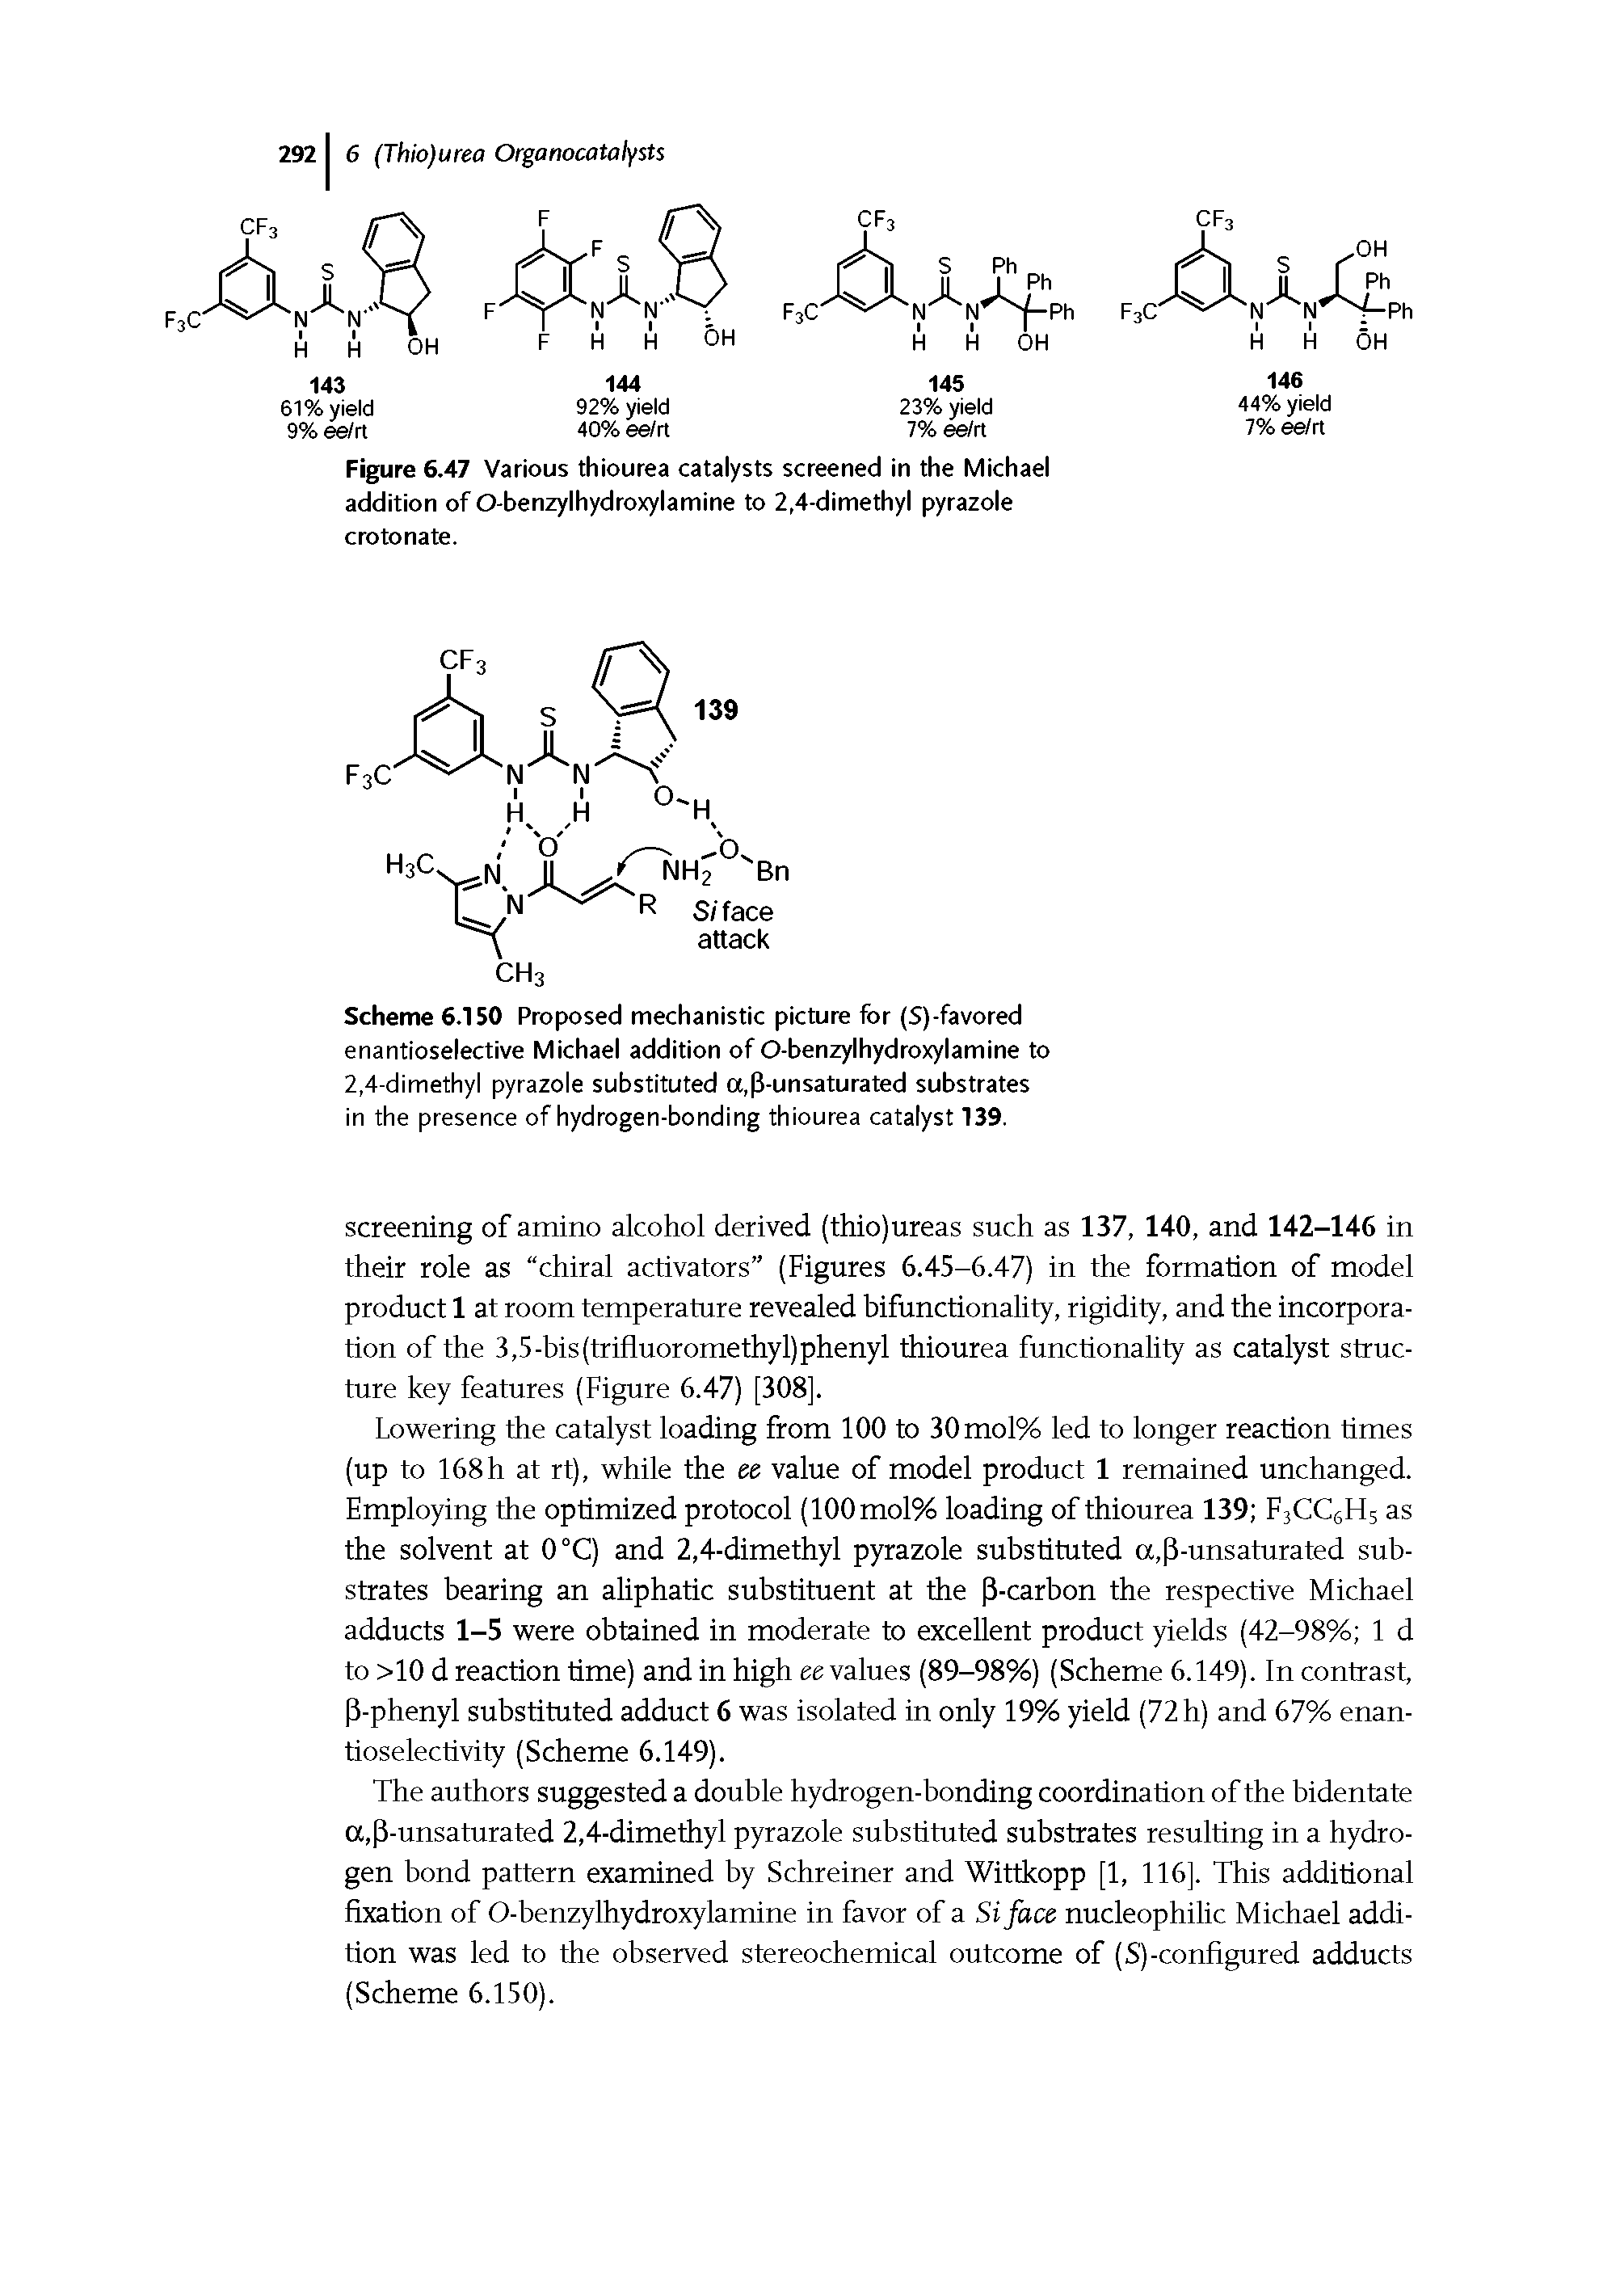 Figure 6.47 Various thiourea catalysts screened in the Michael addition of O-benzylhydroxylamine to 2,4-dimethyl pyrazole crotonate.